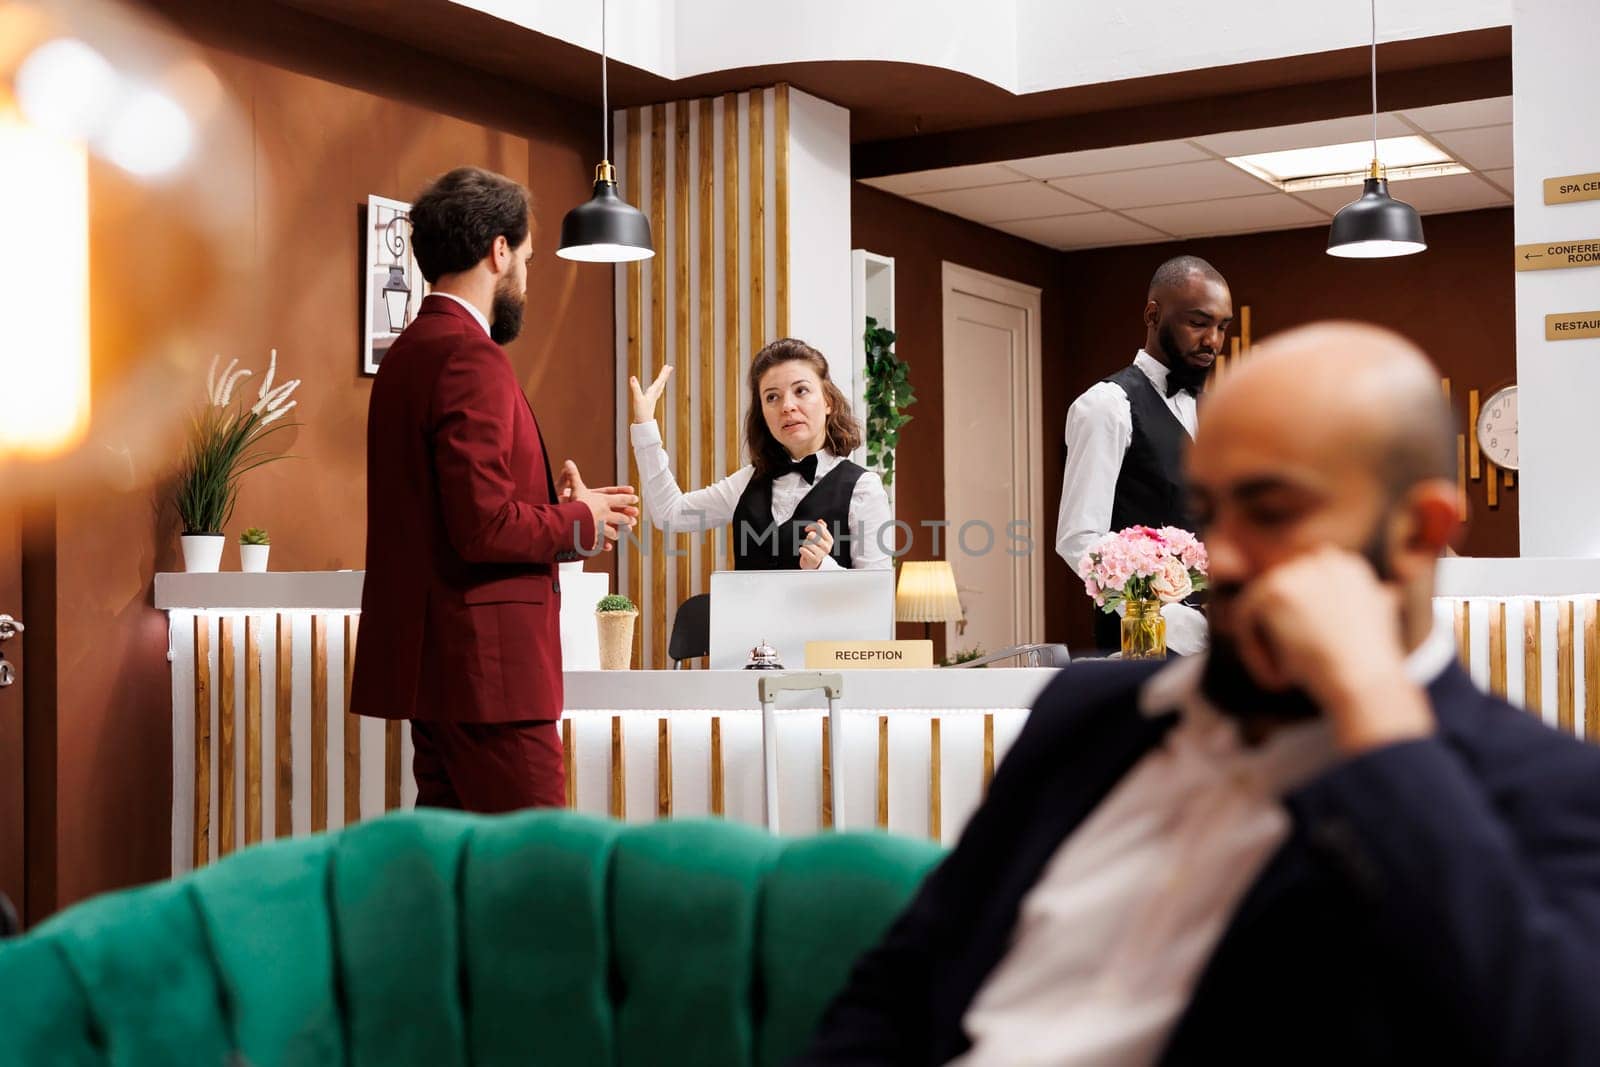 Businessman chats with front desk staff in reception lobby, asking about hotel room services after doing check in. Formal guest arriving at resort, travelling on business trip.